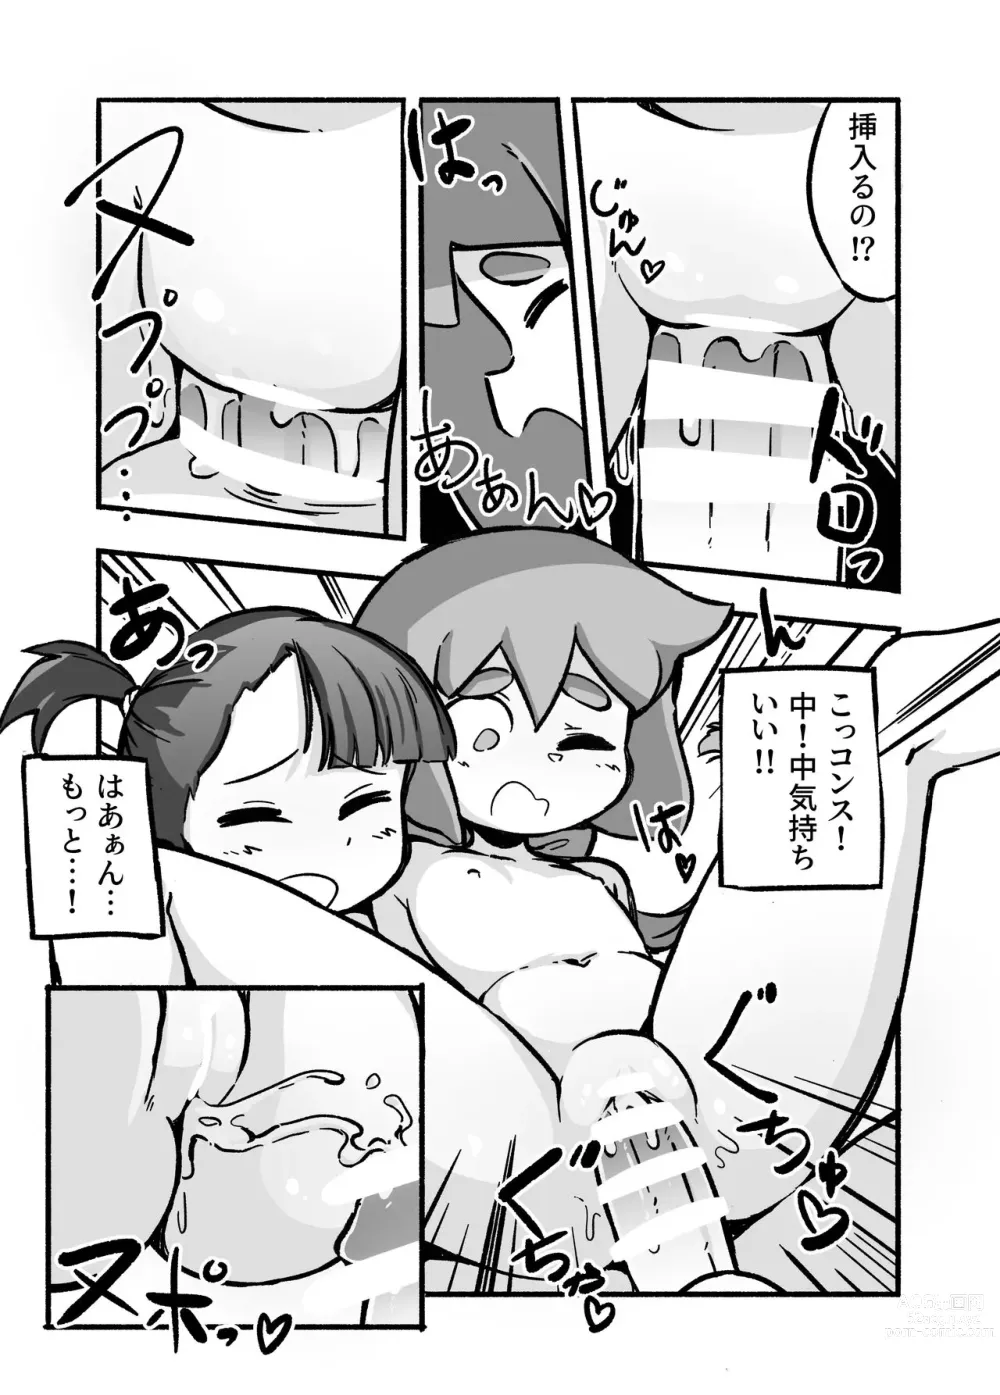 Page 13 of doujinshi Constanzes Laboratory